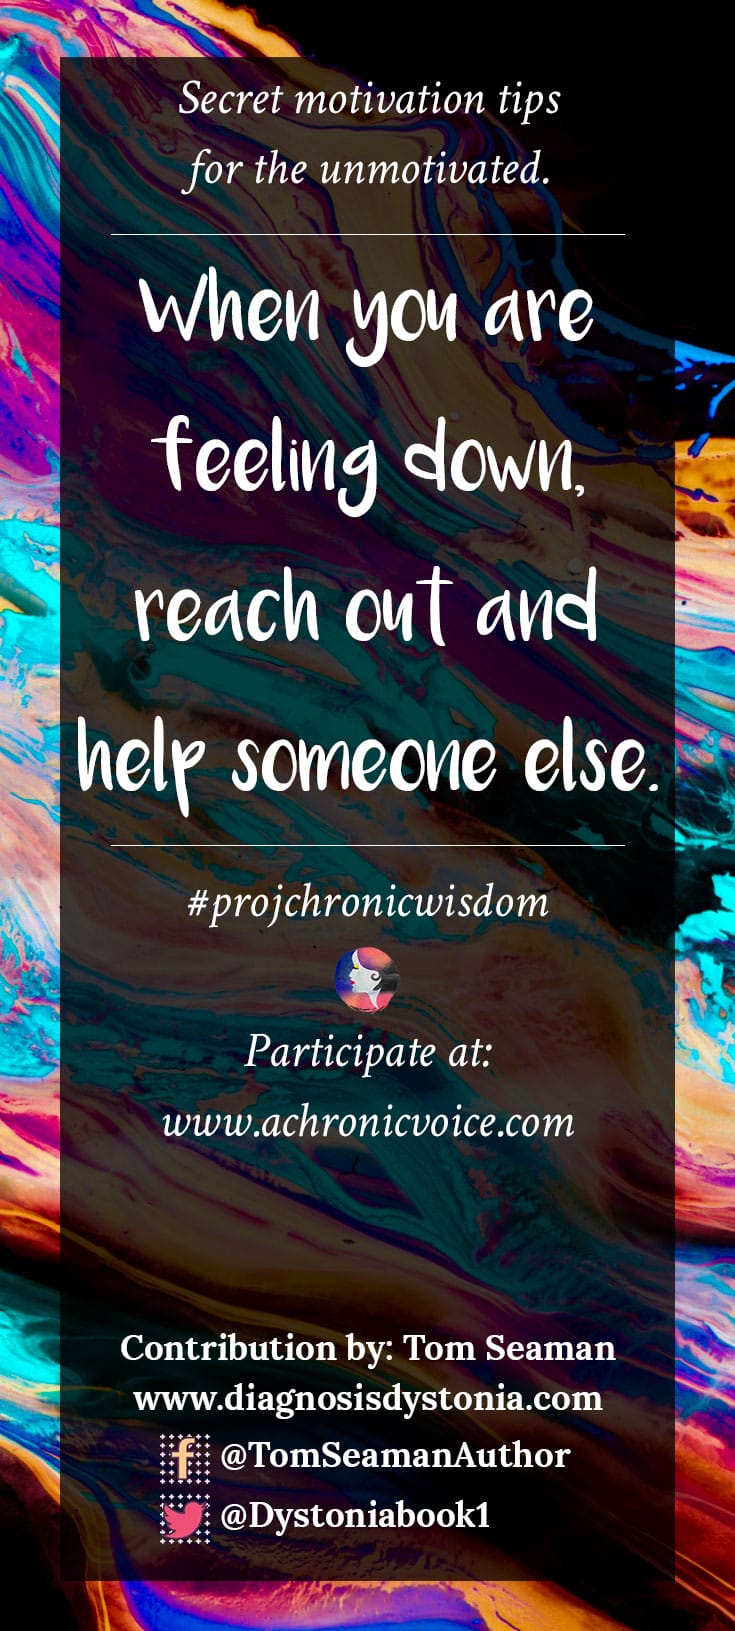 "When you are feeling down, reach out and help someone else." - Tom Seaman | Participate here: www.achronicvoice.com